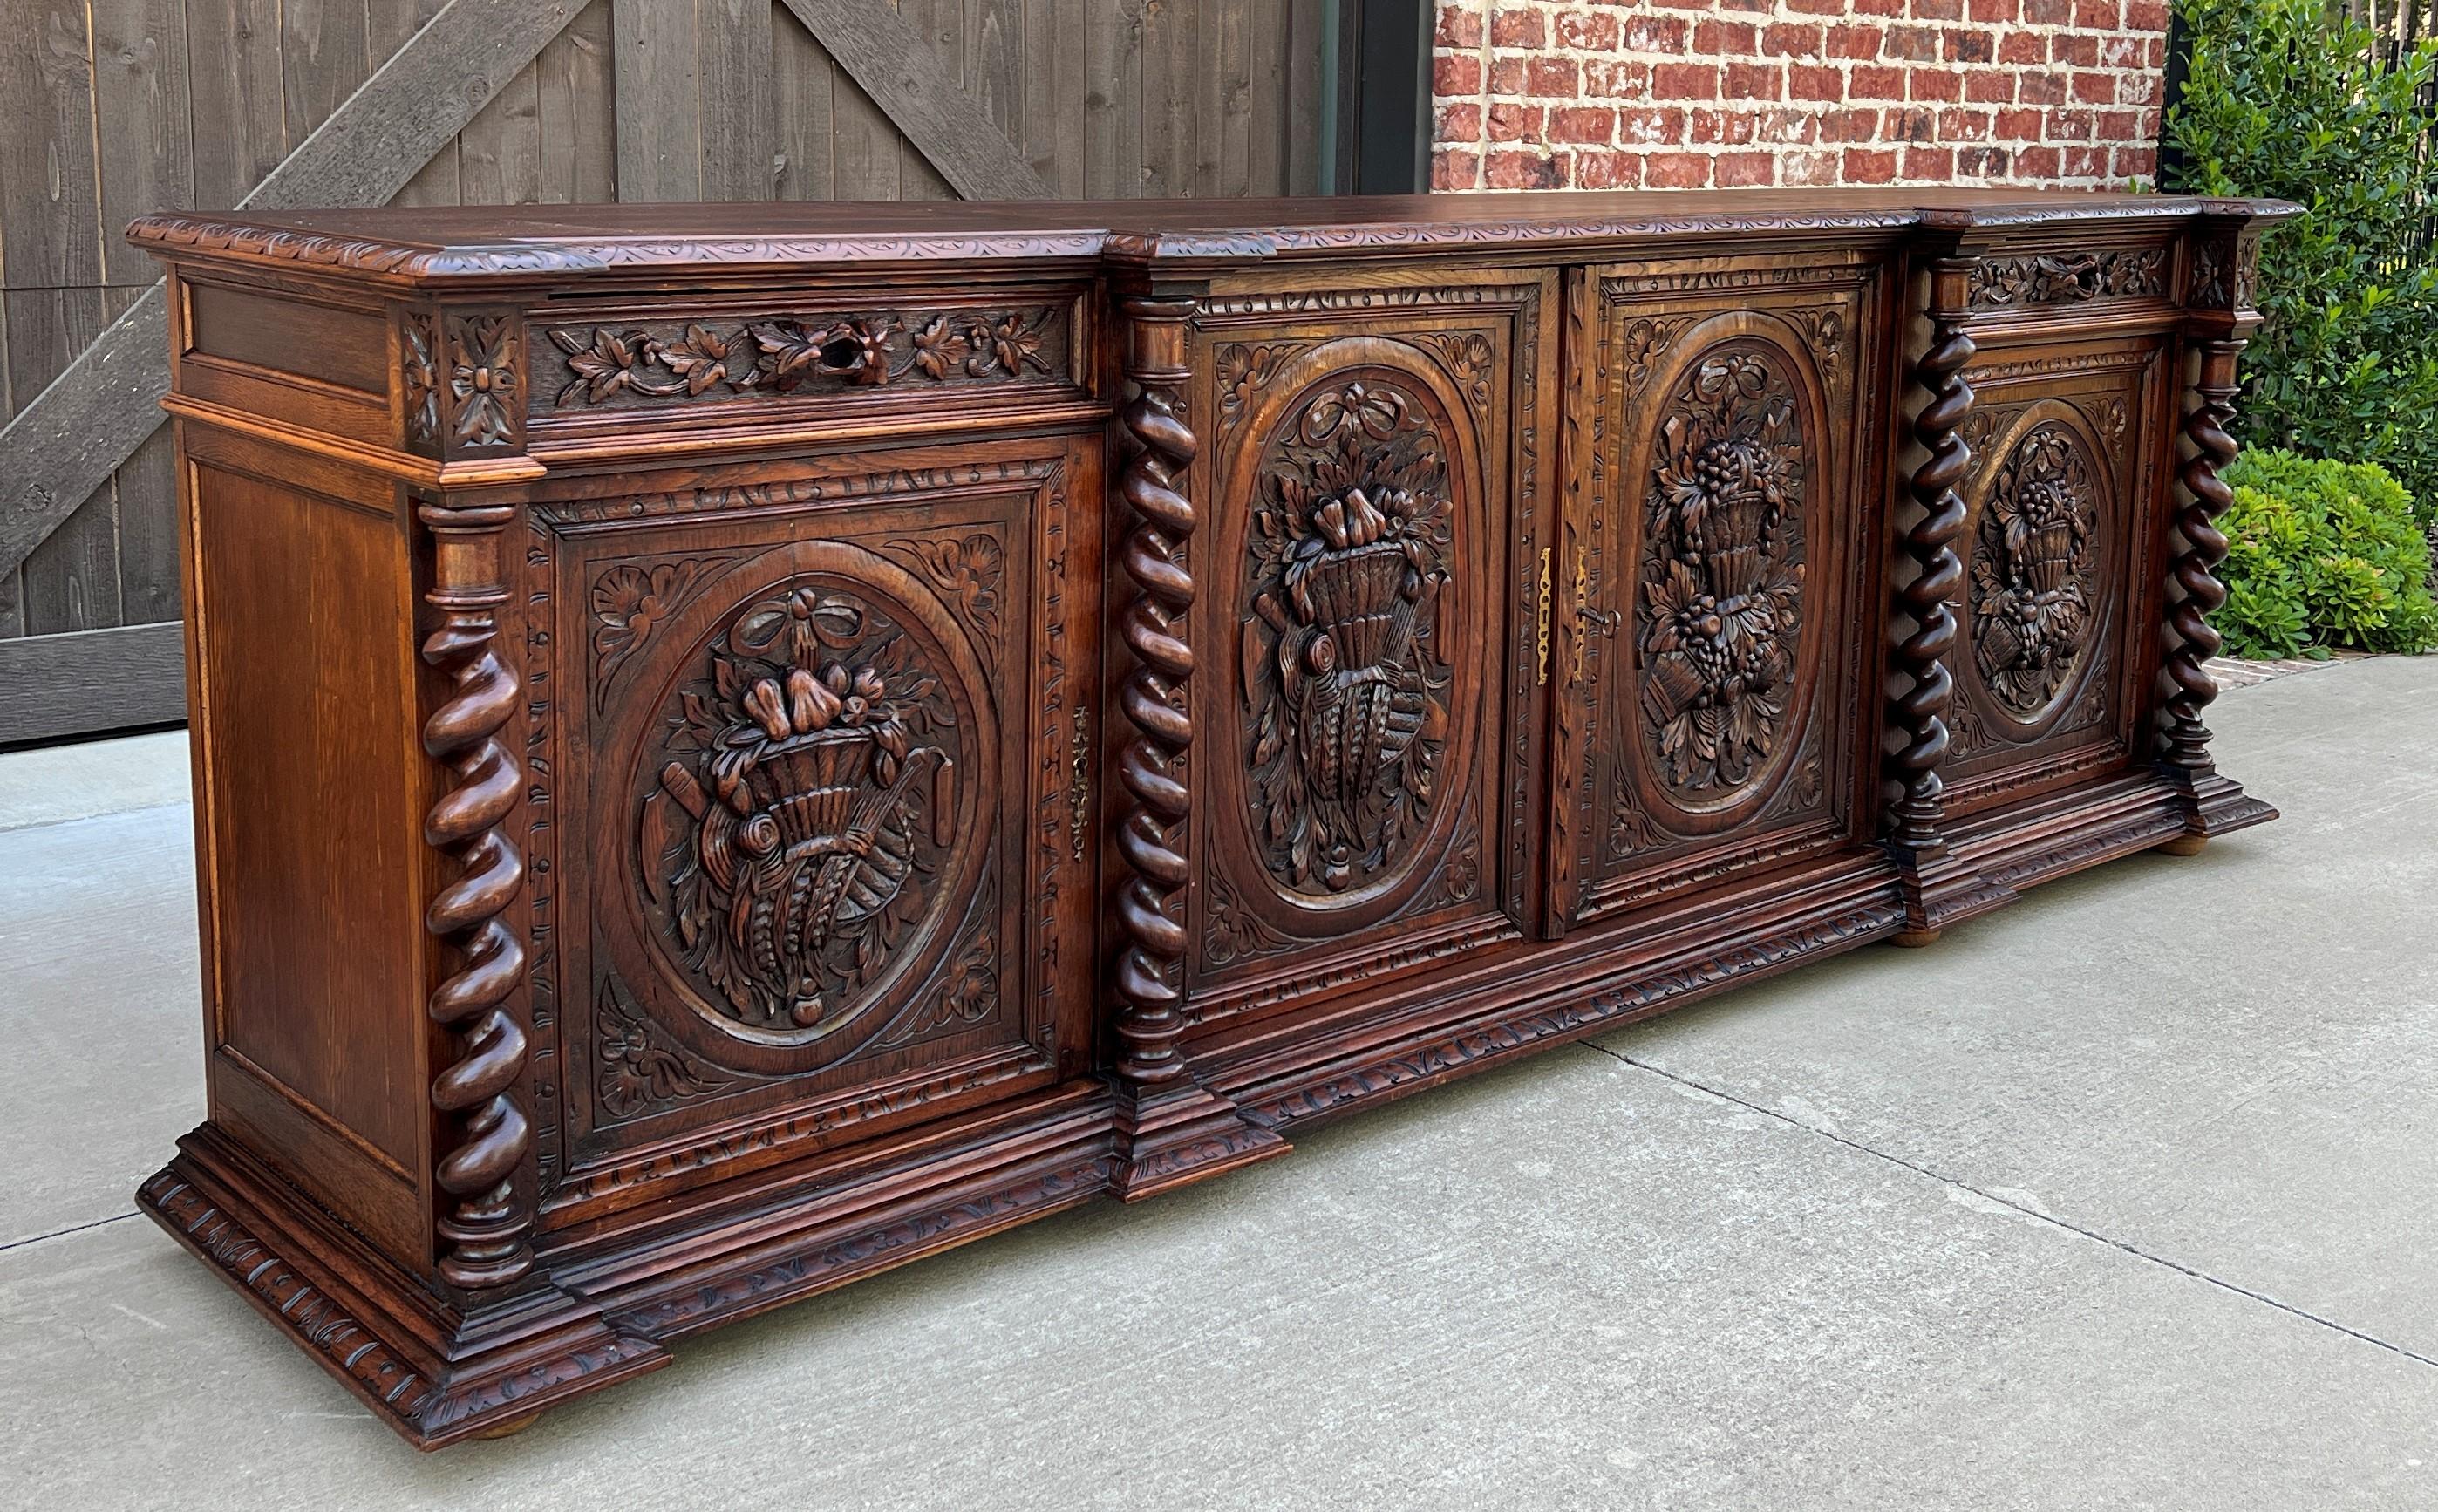 Gorgeous antique French renaissance revival wide oak sideboard, server, or buffet~~4 barley twist posts~~2 drawers and 4 lower cabinets~~ornate carvings~~c. 1880s-1890s

Hard to find large/wide oak sideboard, server or buffet with barley twist